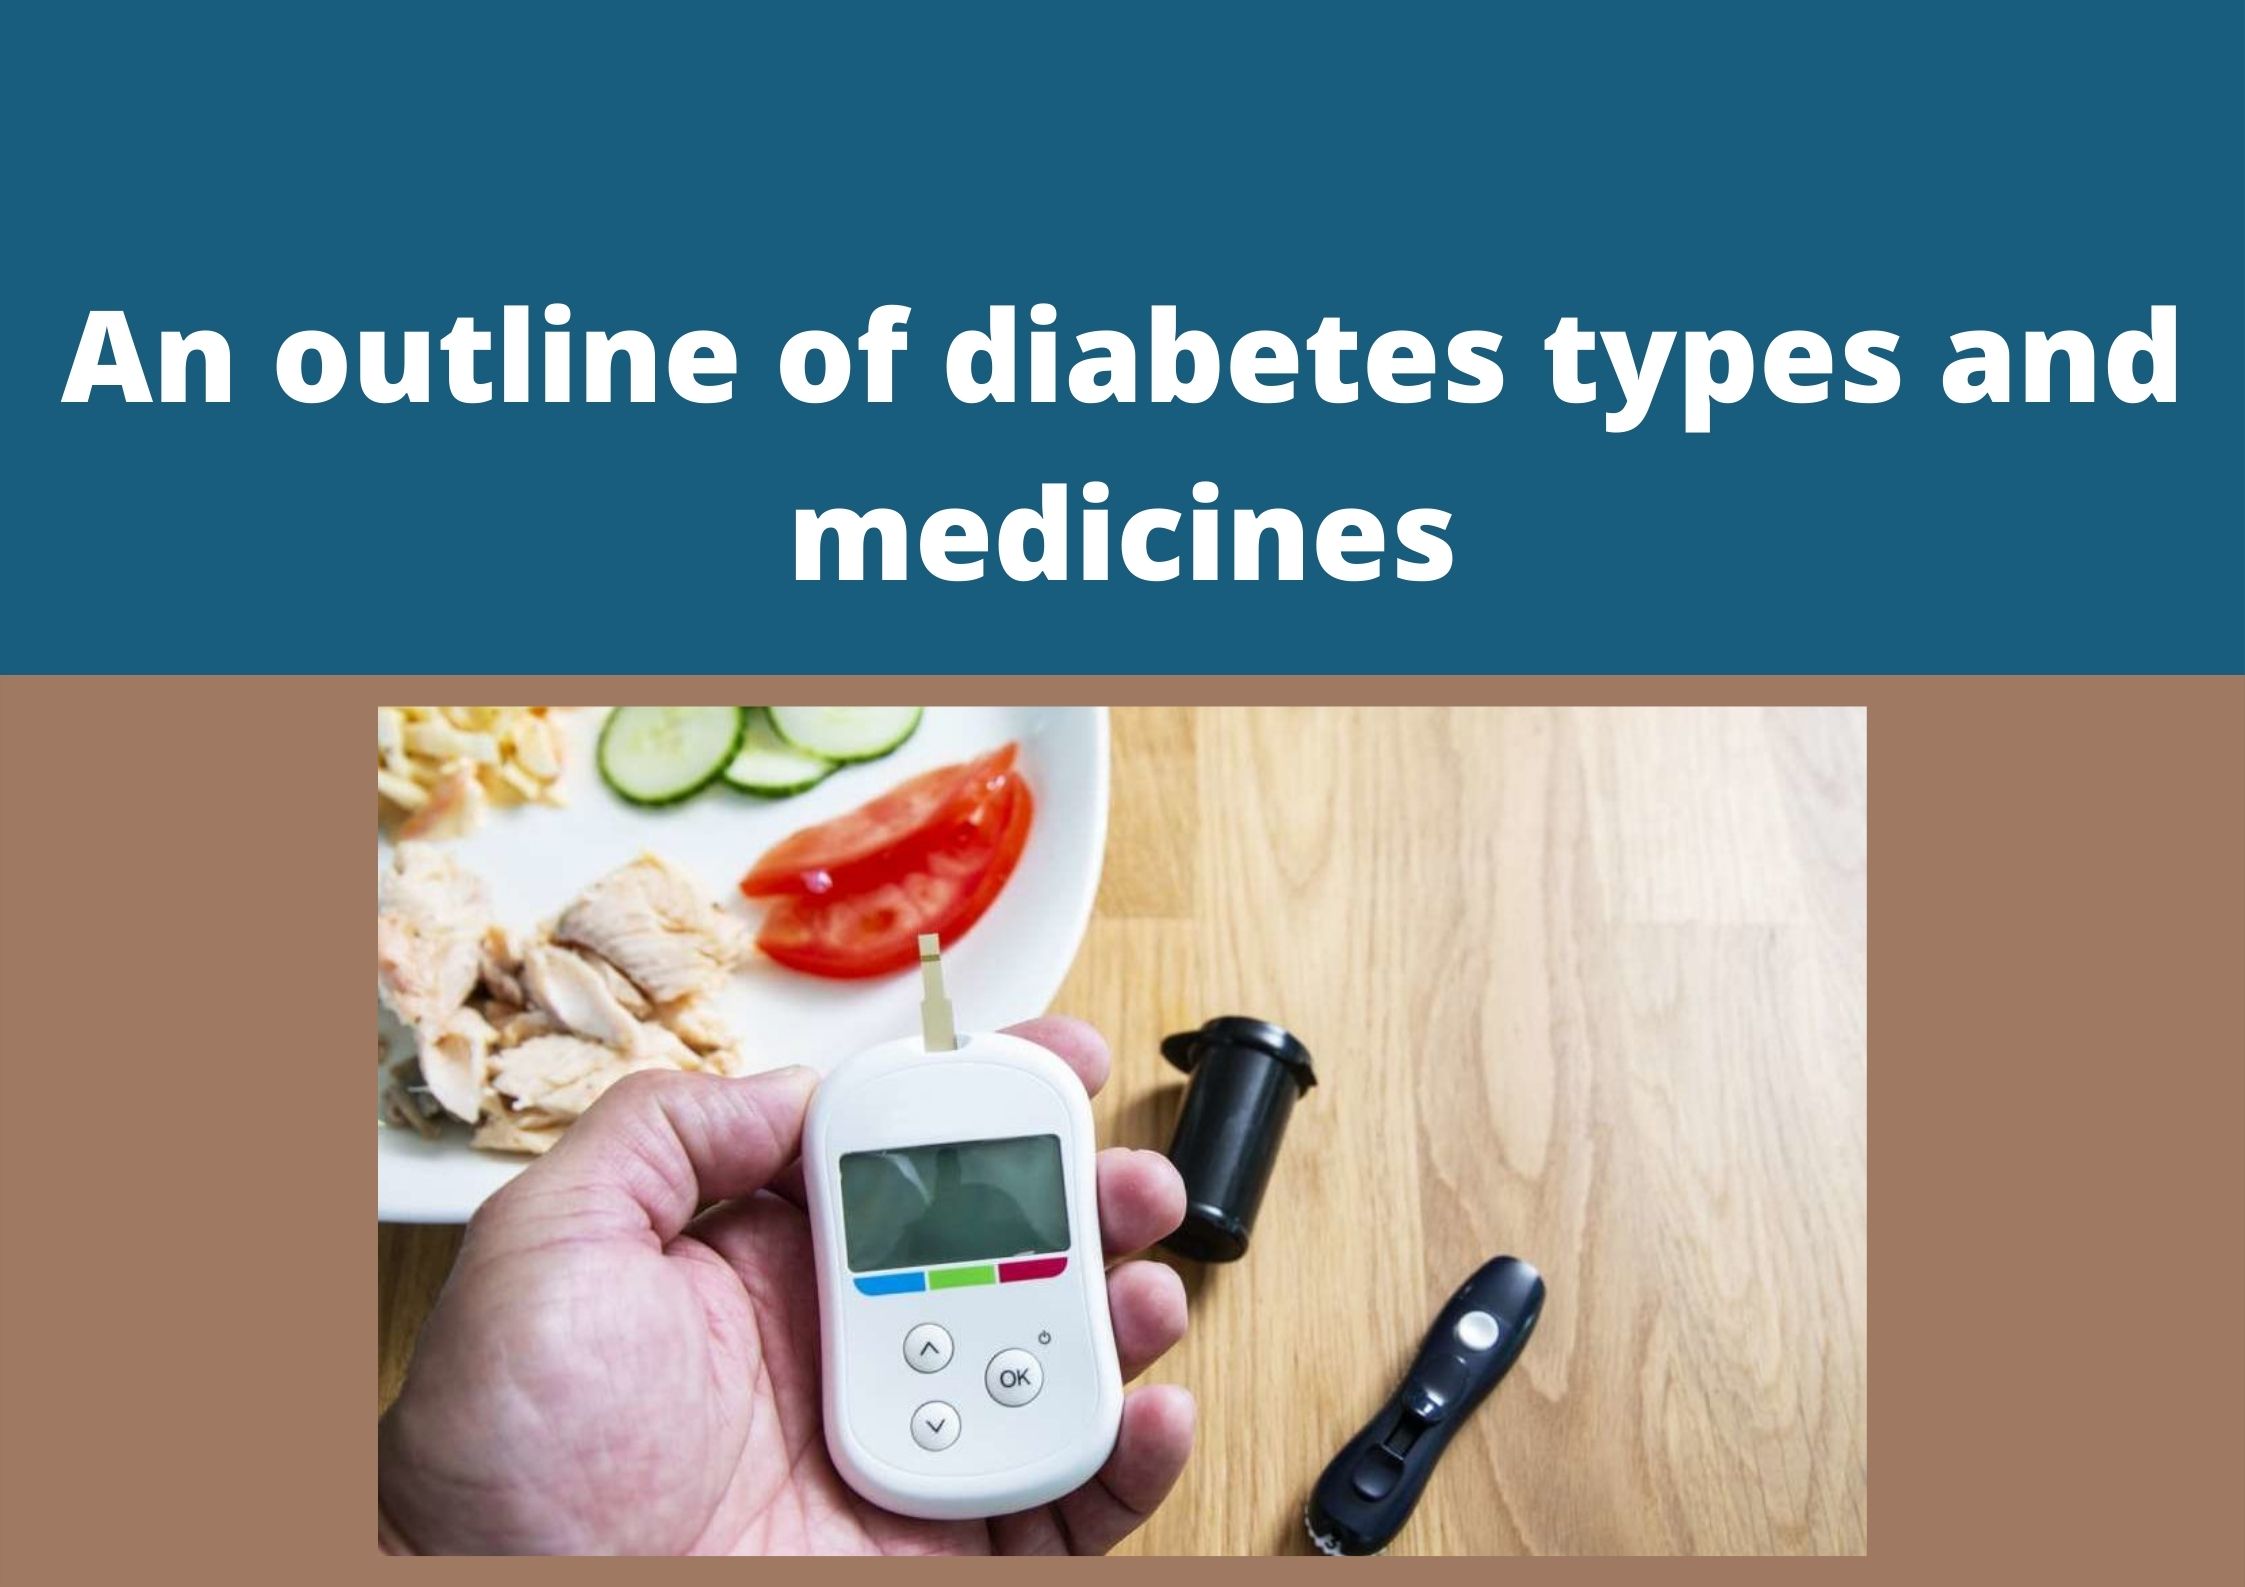 An outline of diabetes types and medicines